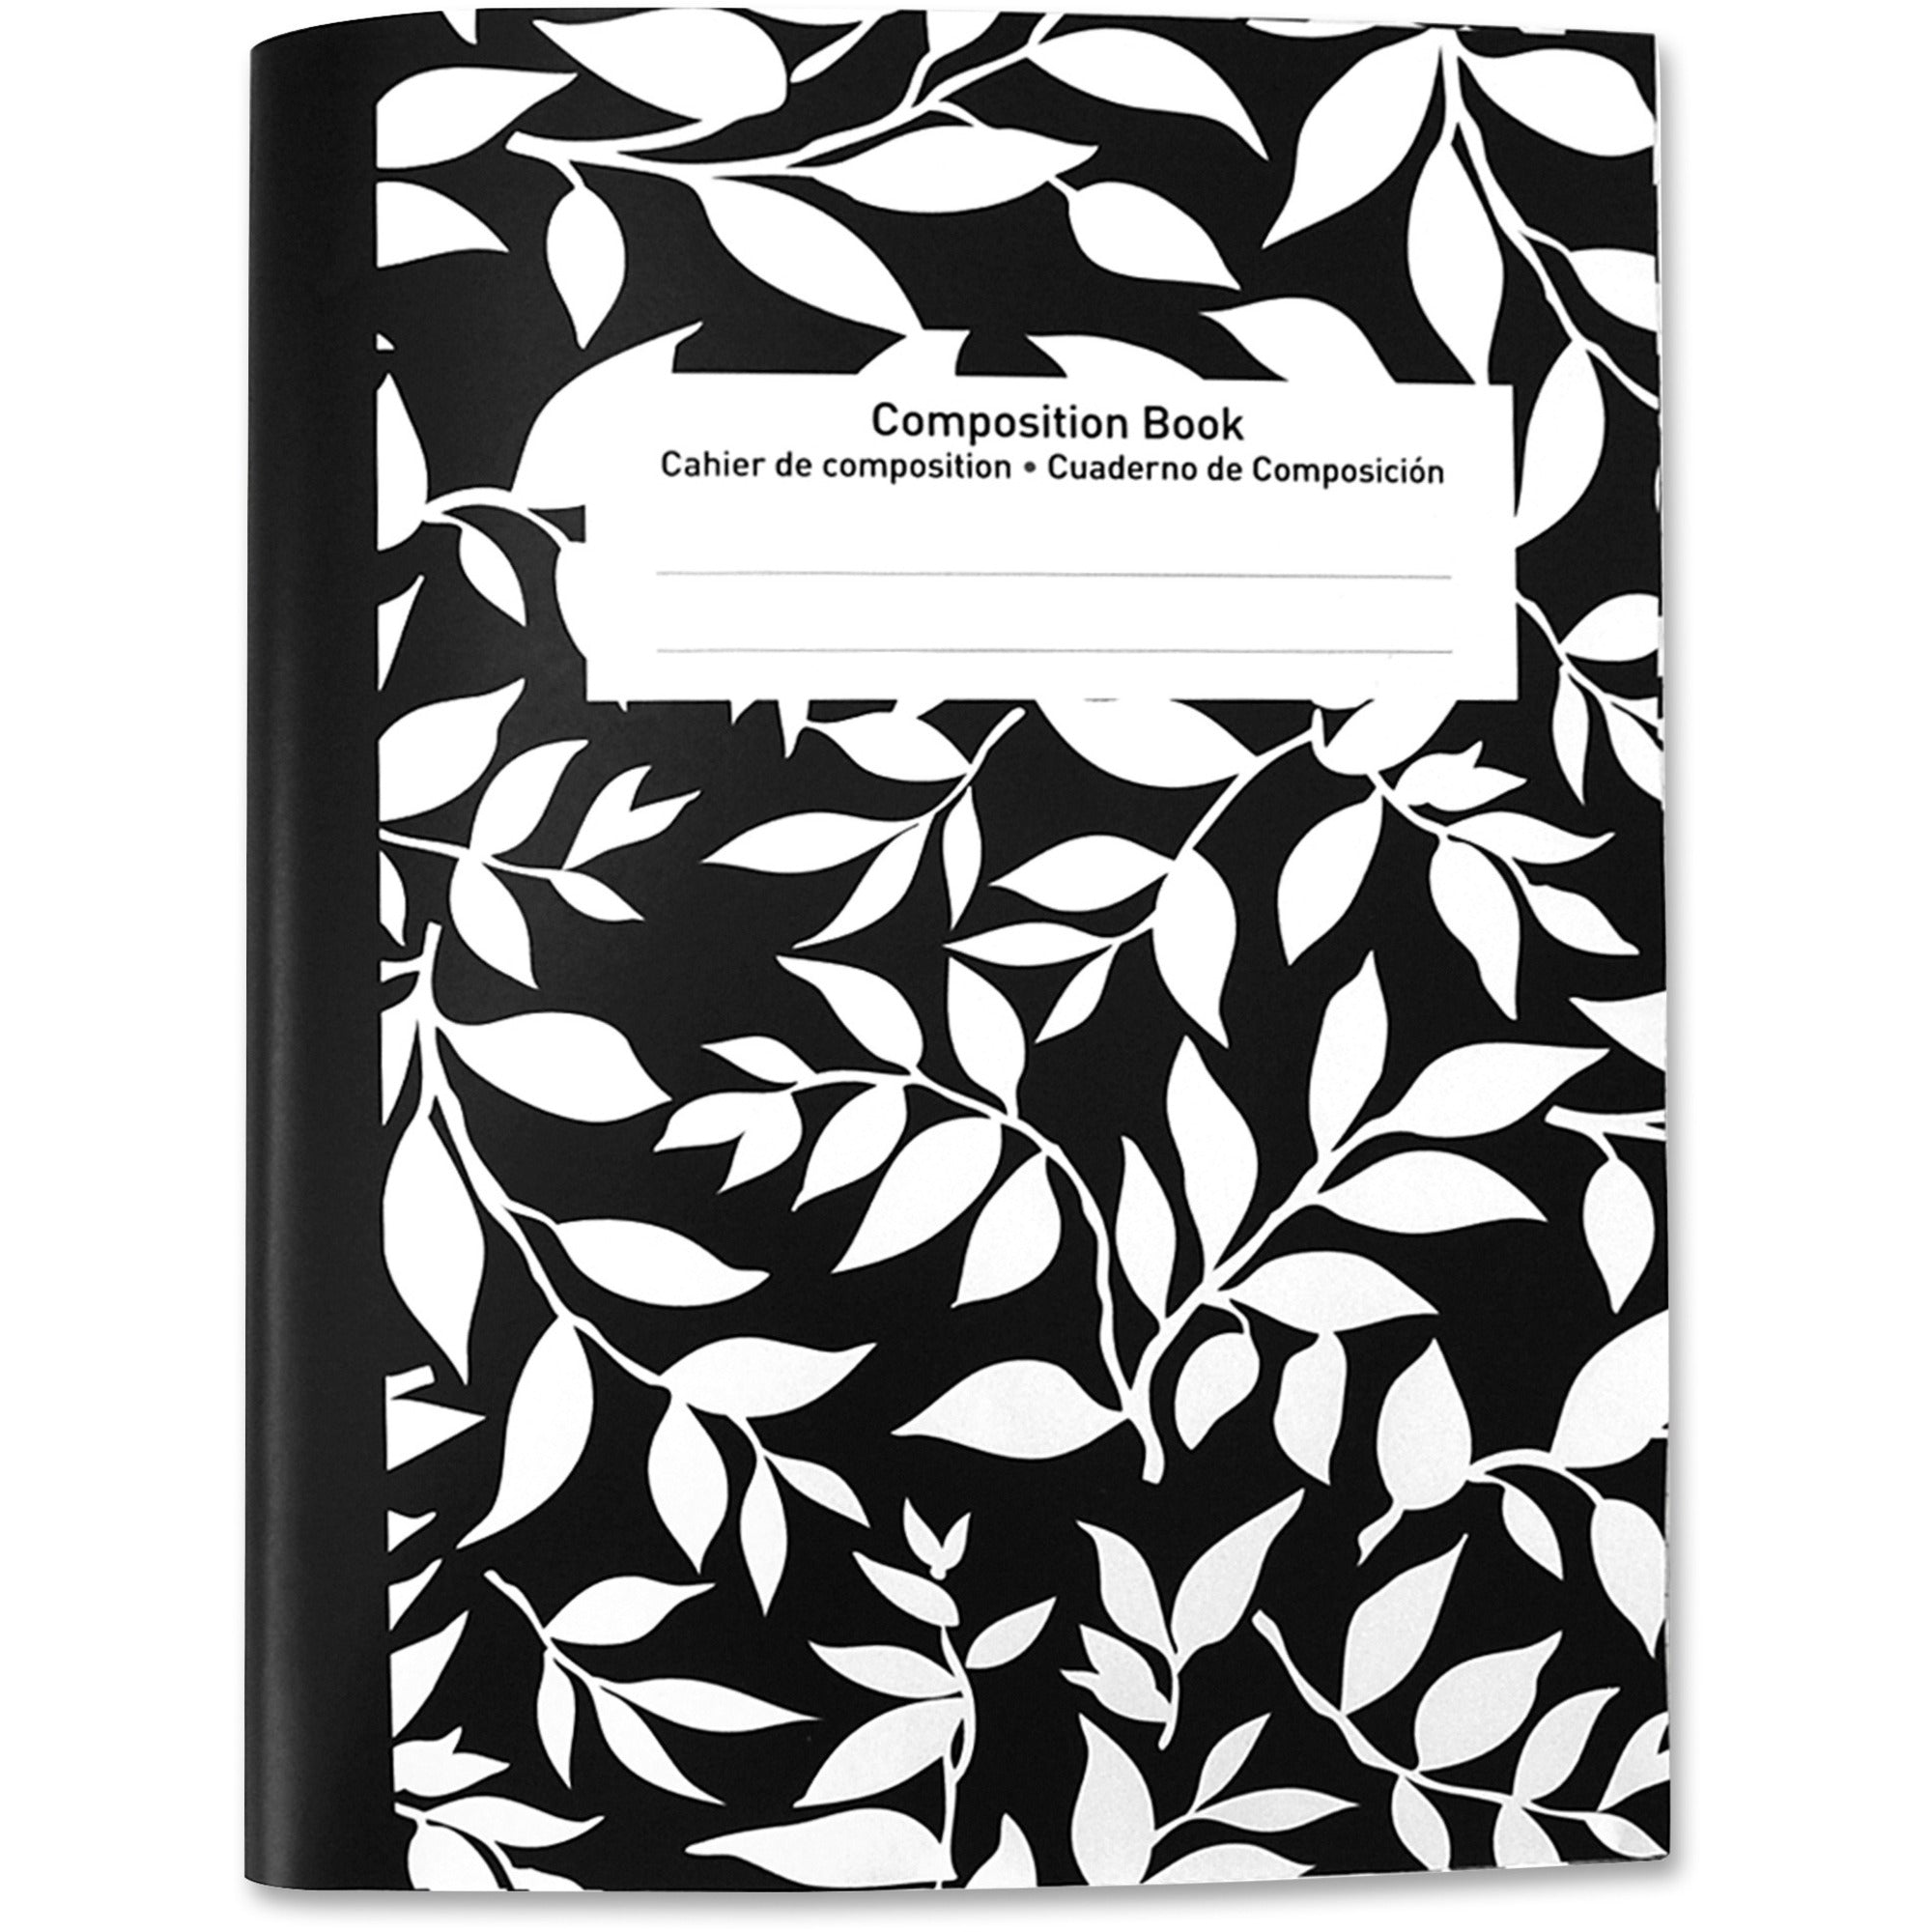 Sparco Composition Book - 80 Sheets - 15 lb Basis Weight - 7 1/2" x 10" - 9.75" - Bright White Paper - Black Marble Cover - Recycled - 1 Each - 